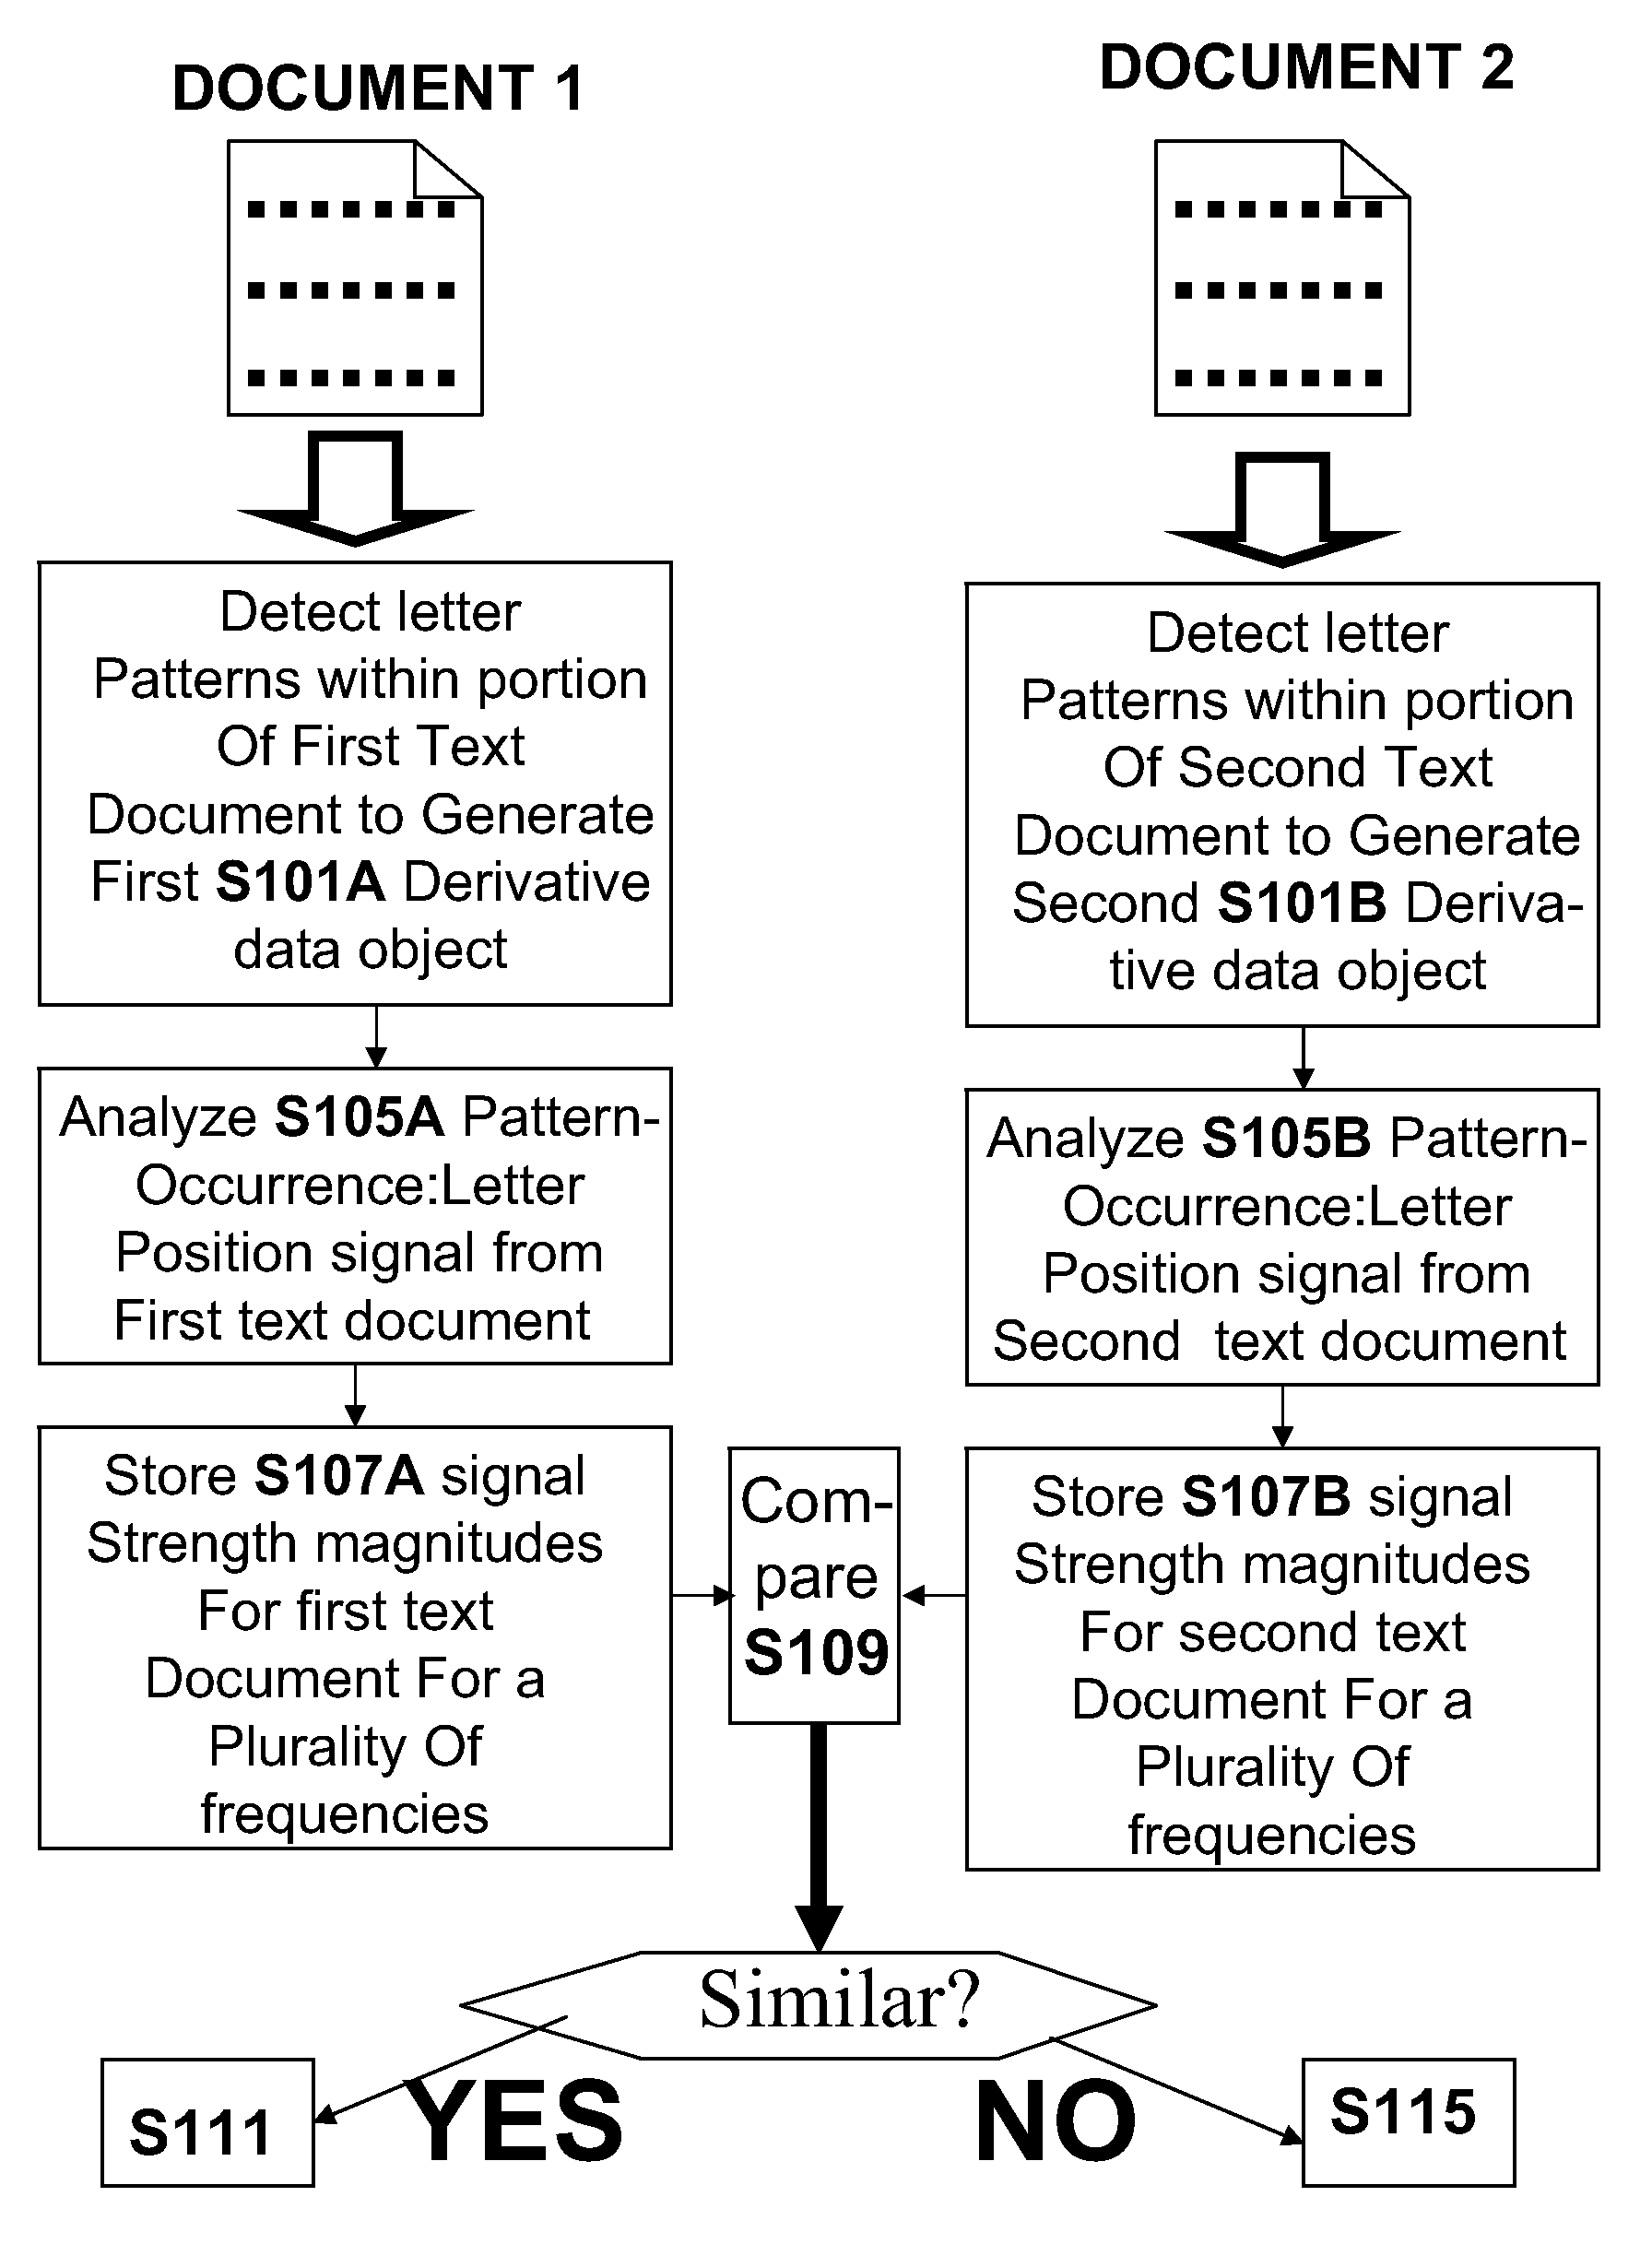 Computer-implemented method and apparatus for encoding natural-language text content and/or detecting plagiarism